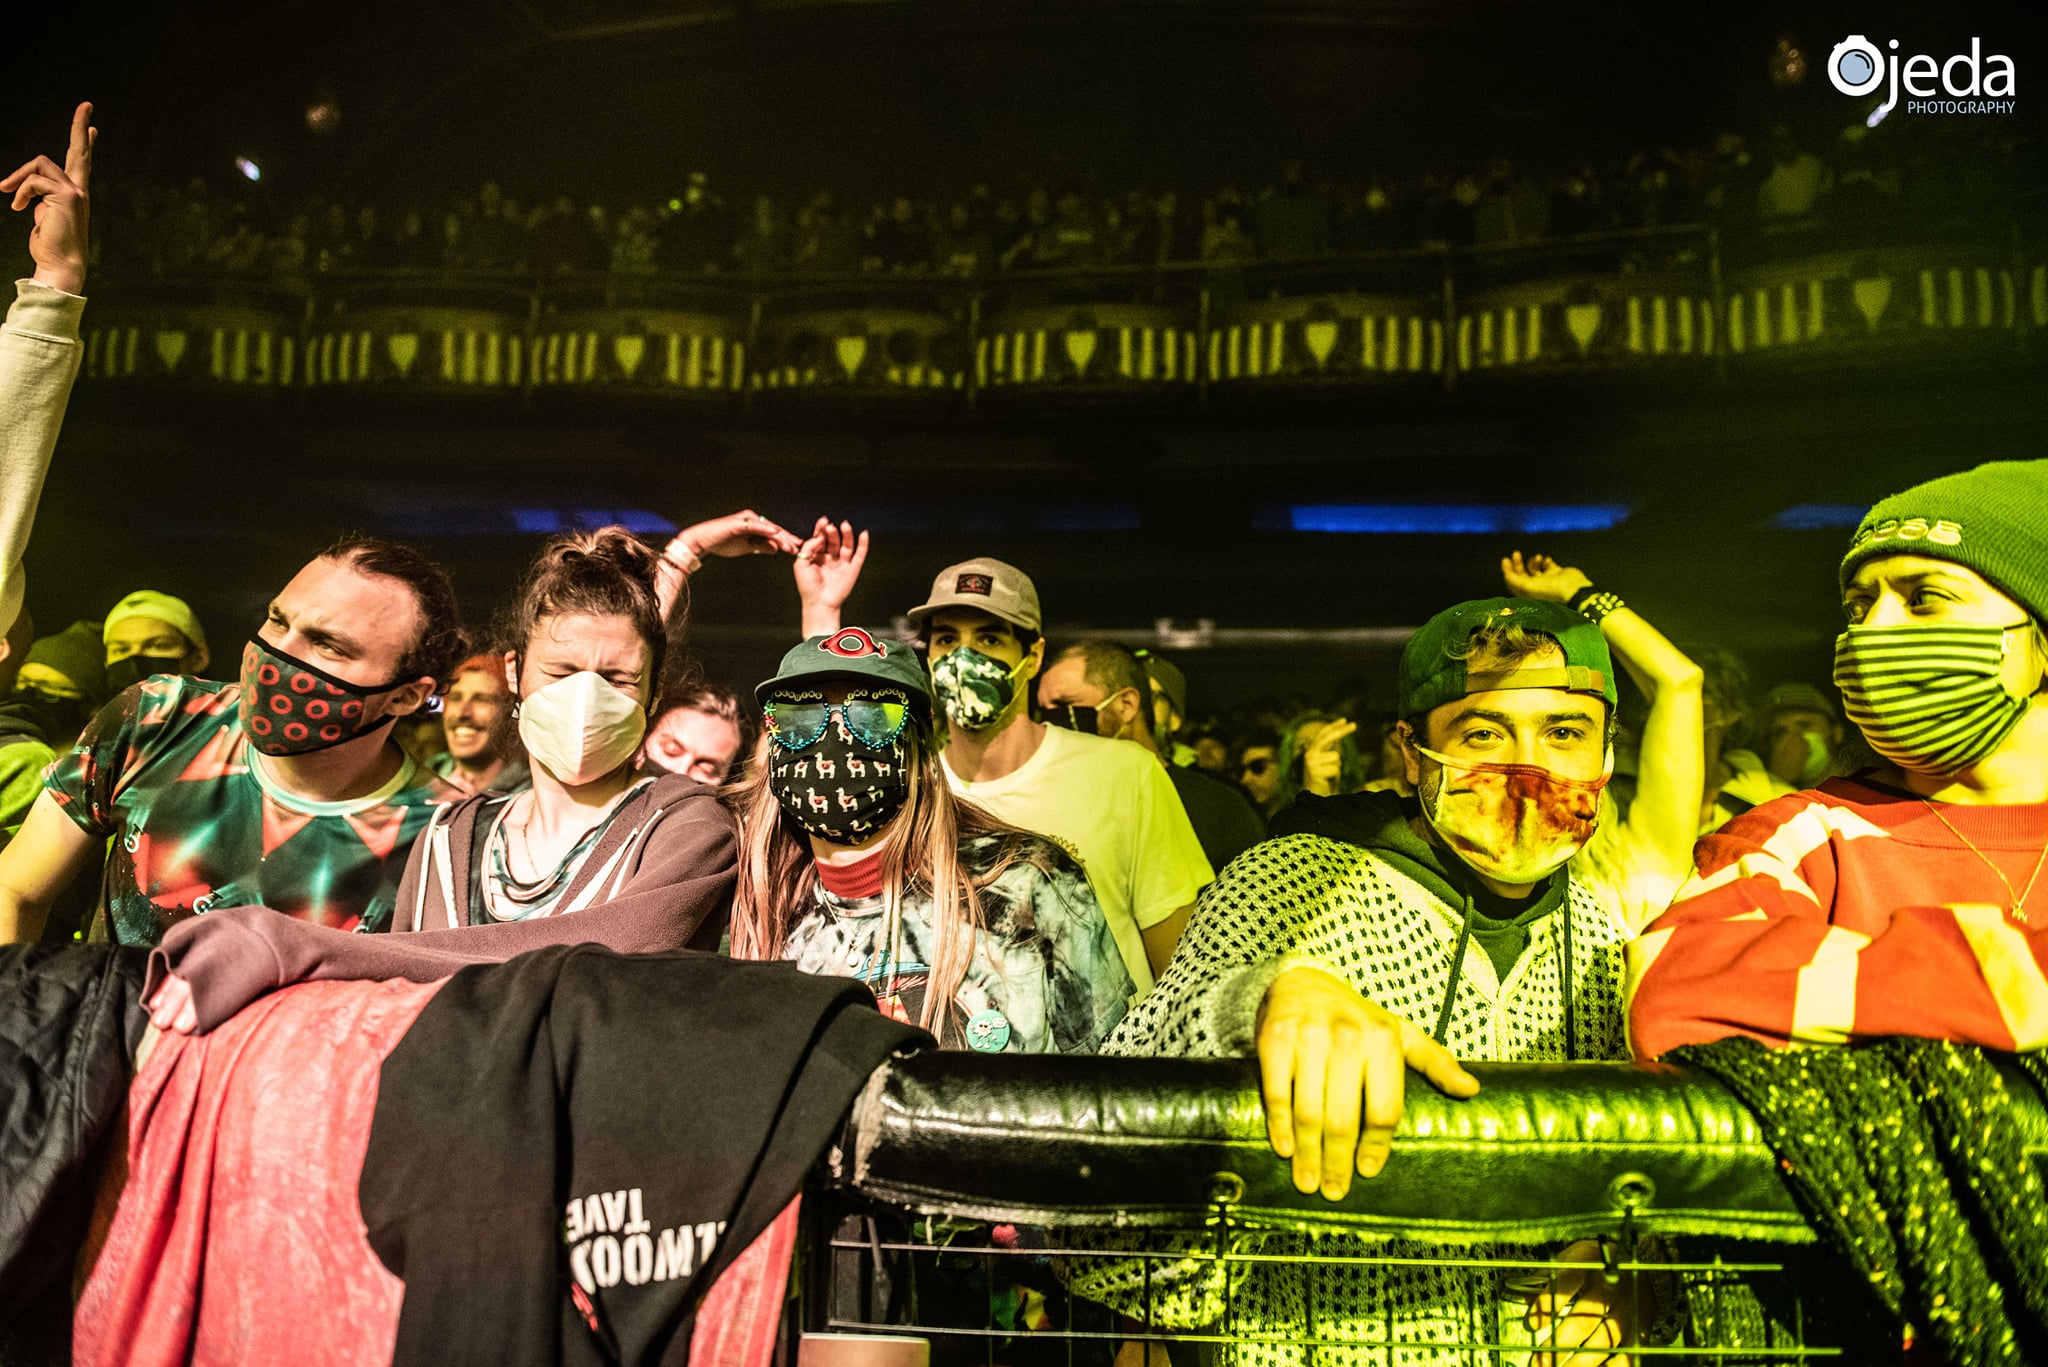 Goose fans masked up and ready to ring in the New Year | Photo by Daniel Ojeda